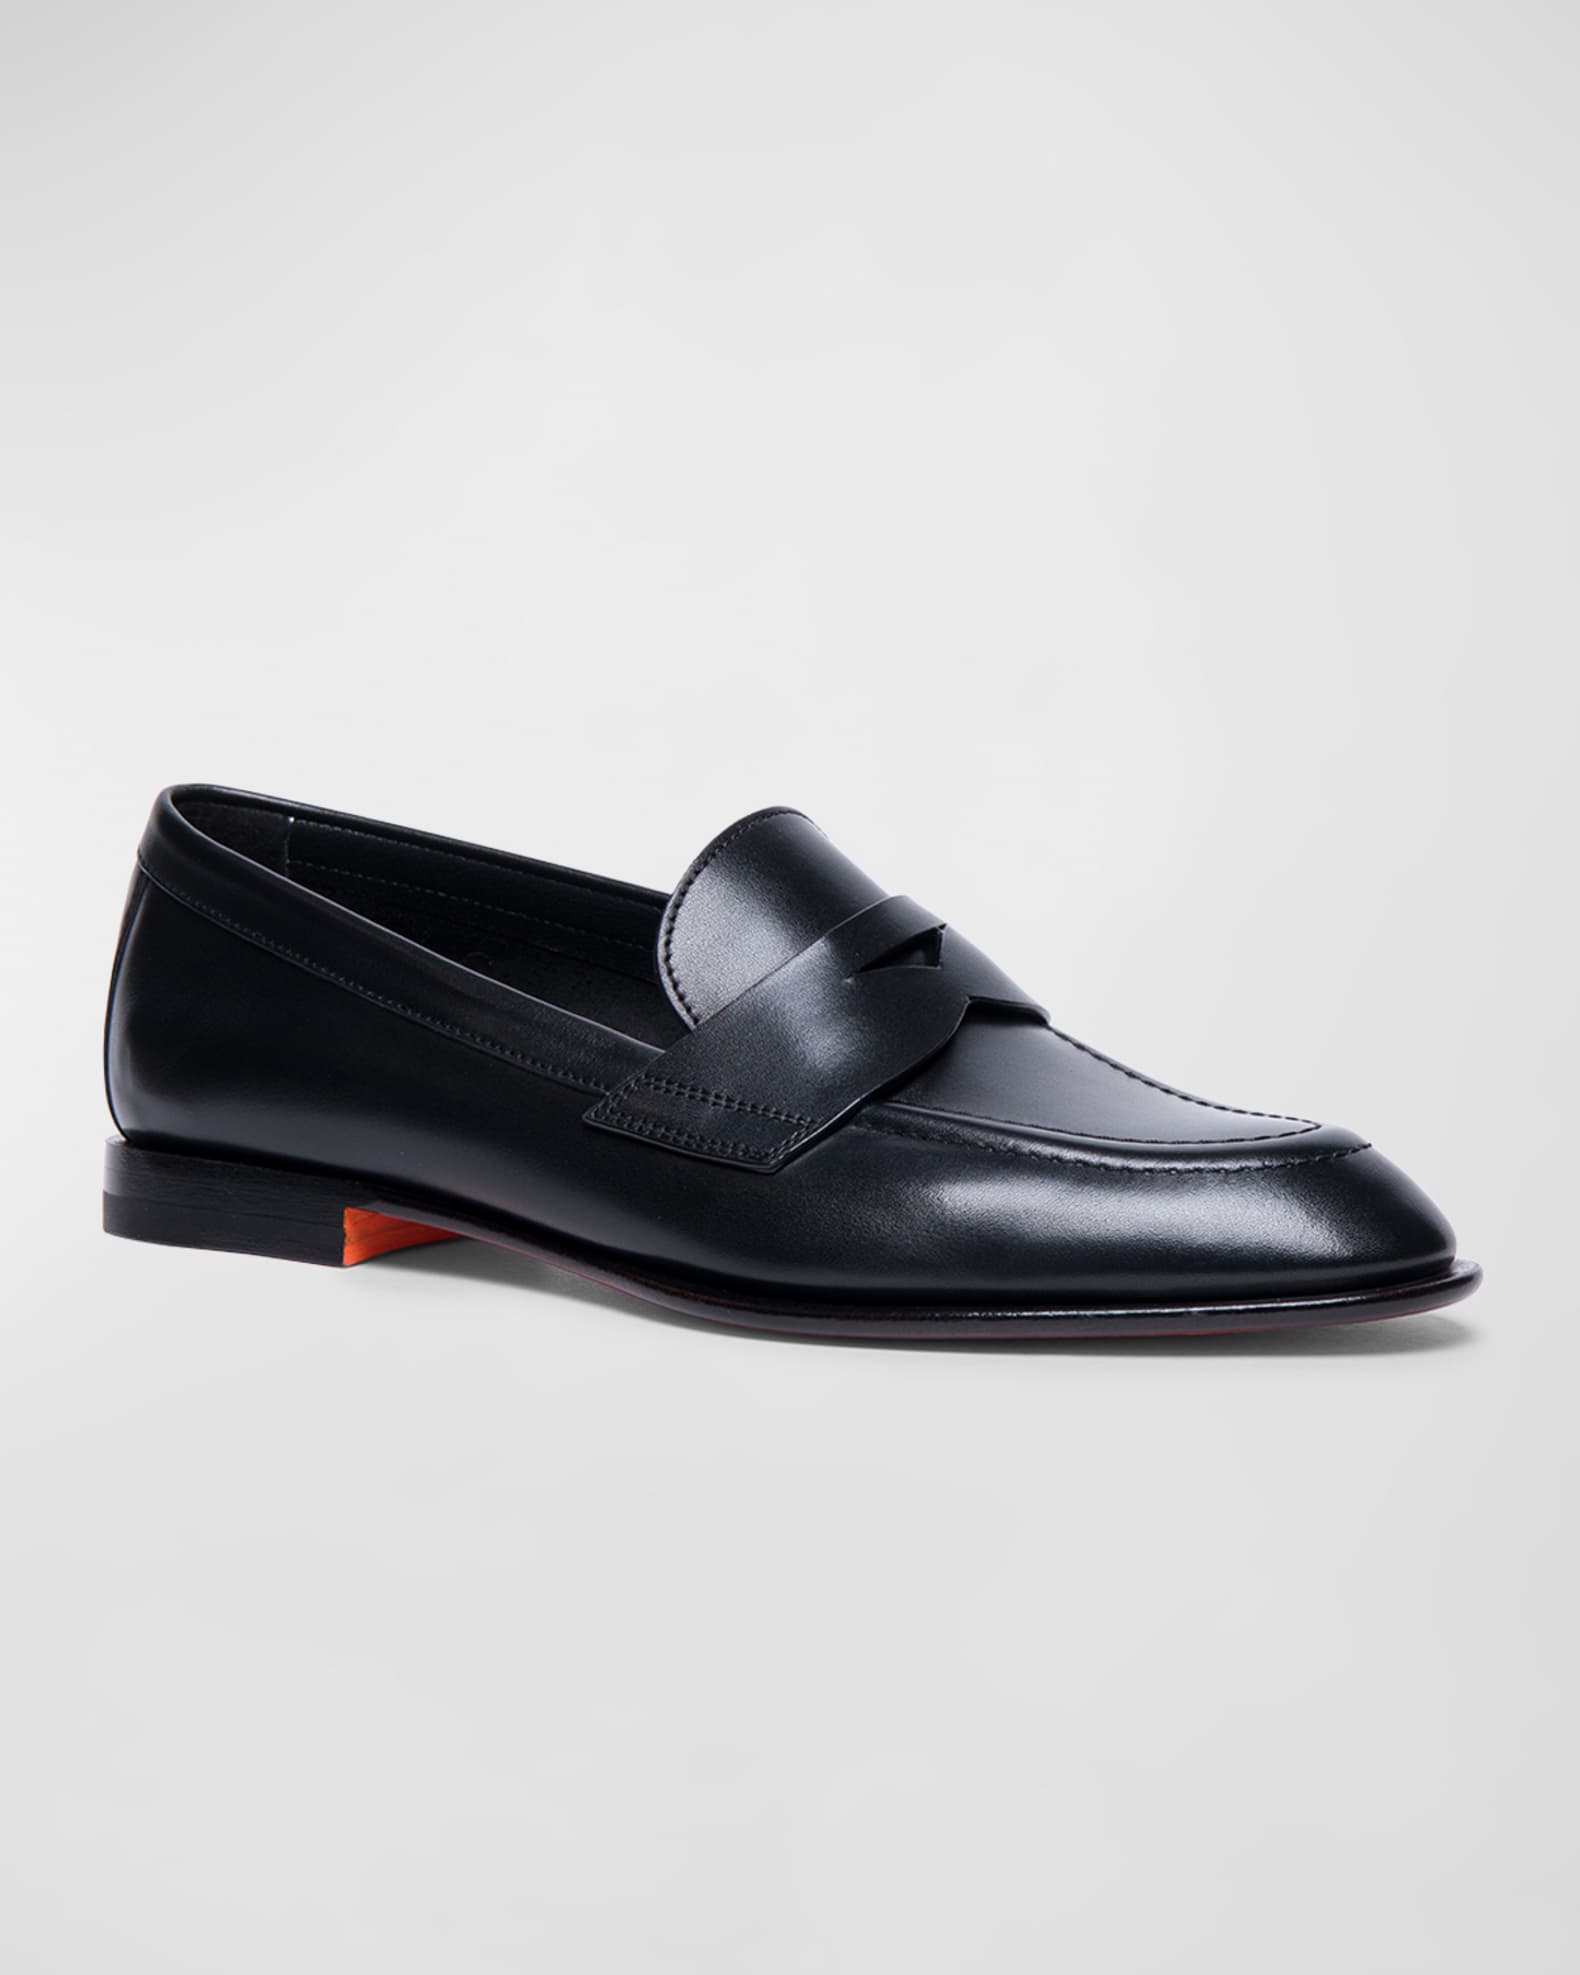 Santoni Famed Leather Penny Loafers | Neiman Marcus